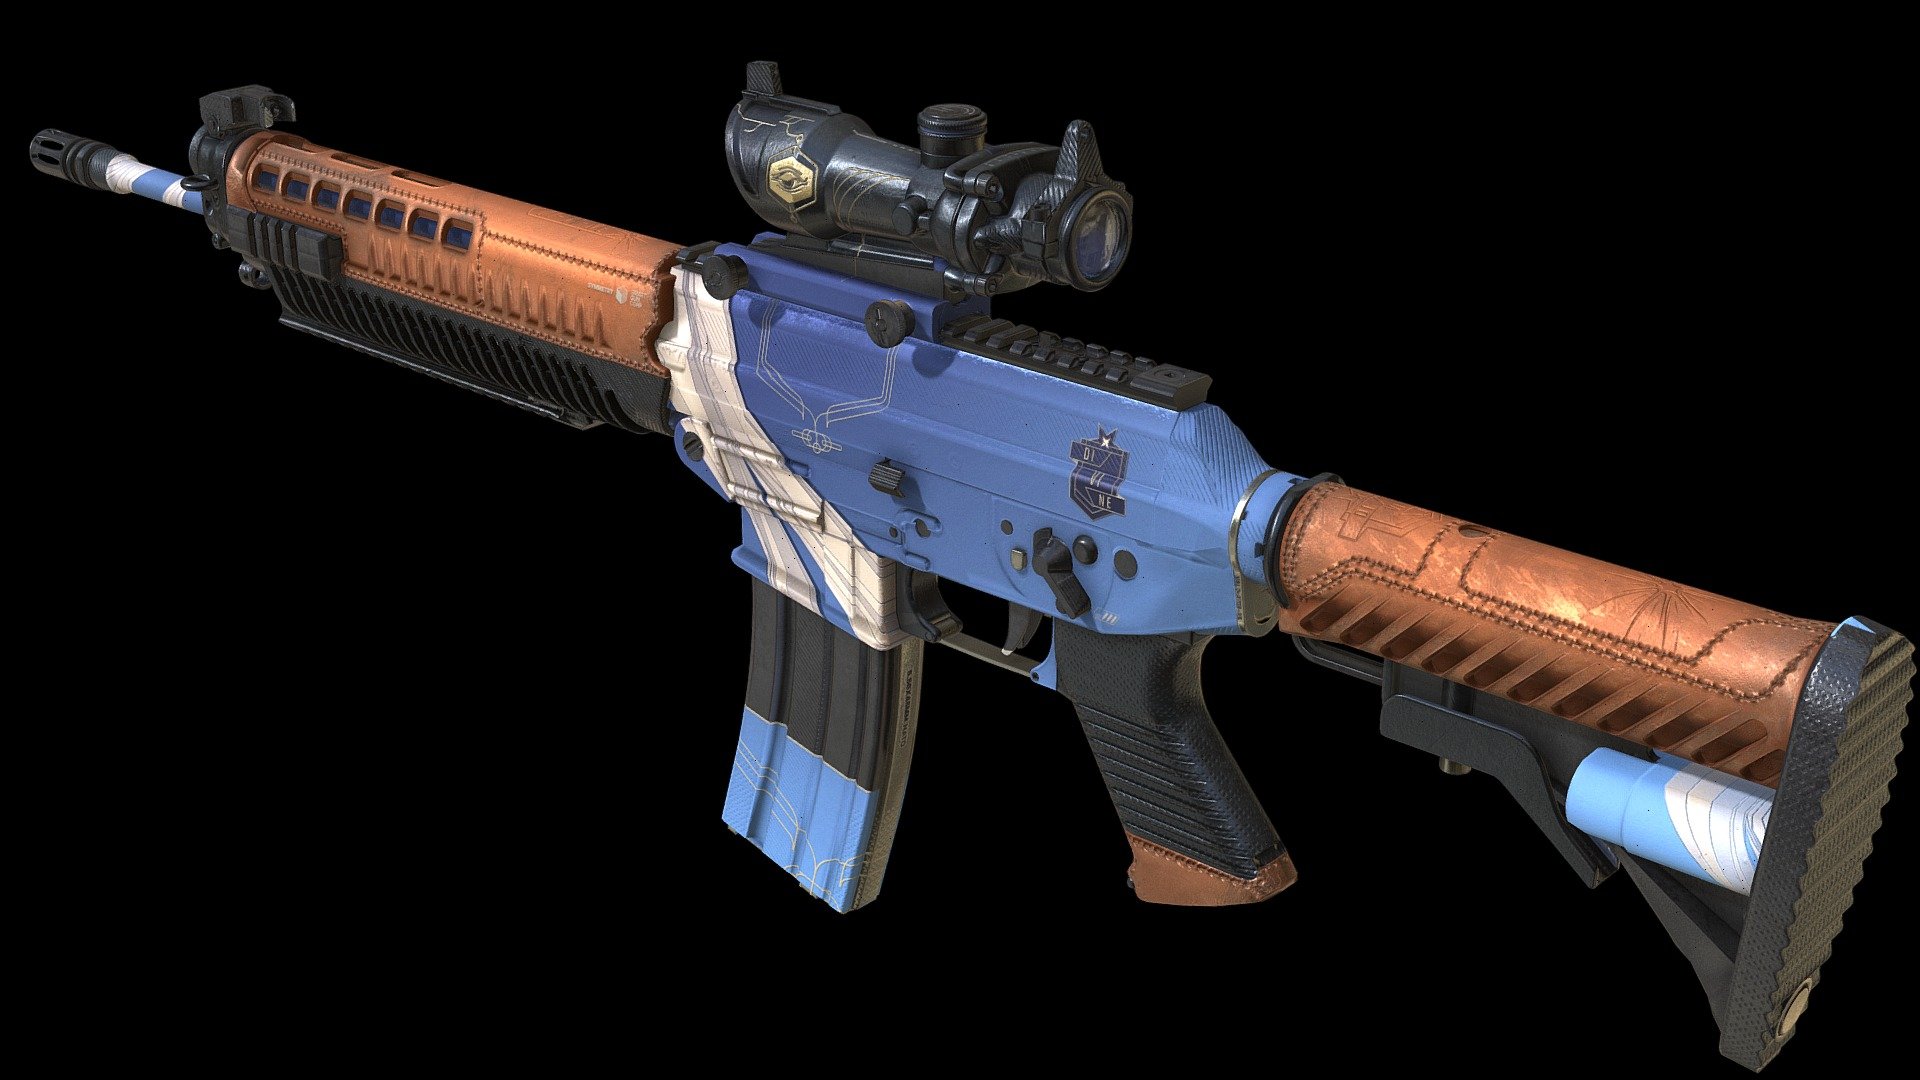 Concept texture/skin for Counter Strike 2
If you want to see my work ingame., vote for my workshop submissions here: https://steamcommunity.com/id/tanapta/myworkshopfiles/



This work includes complete texture/material set on a predefined ingame model.

My focus was and always will be to create medium-tier weapon skins, that are relatively neutral and not overly complicated. I know there are so many superb artists that create a true pieces of Art - I’m just a humble ui/ux designer that puts his soul to create a niche of guns that fit my needs.

Like all of my work, I will adapt this style to various guns with changes and adjustments where it seems necessary (for example additional material because of model complexity etc).

Much love,
Tanapta - SG553 - DIVINE (CS2) - 3D model by tanapta 3d model